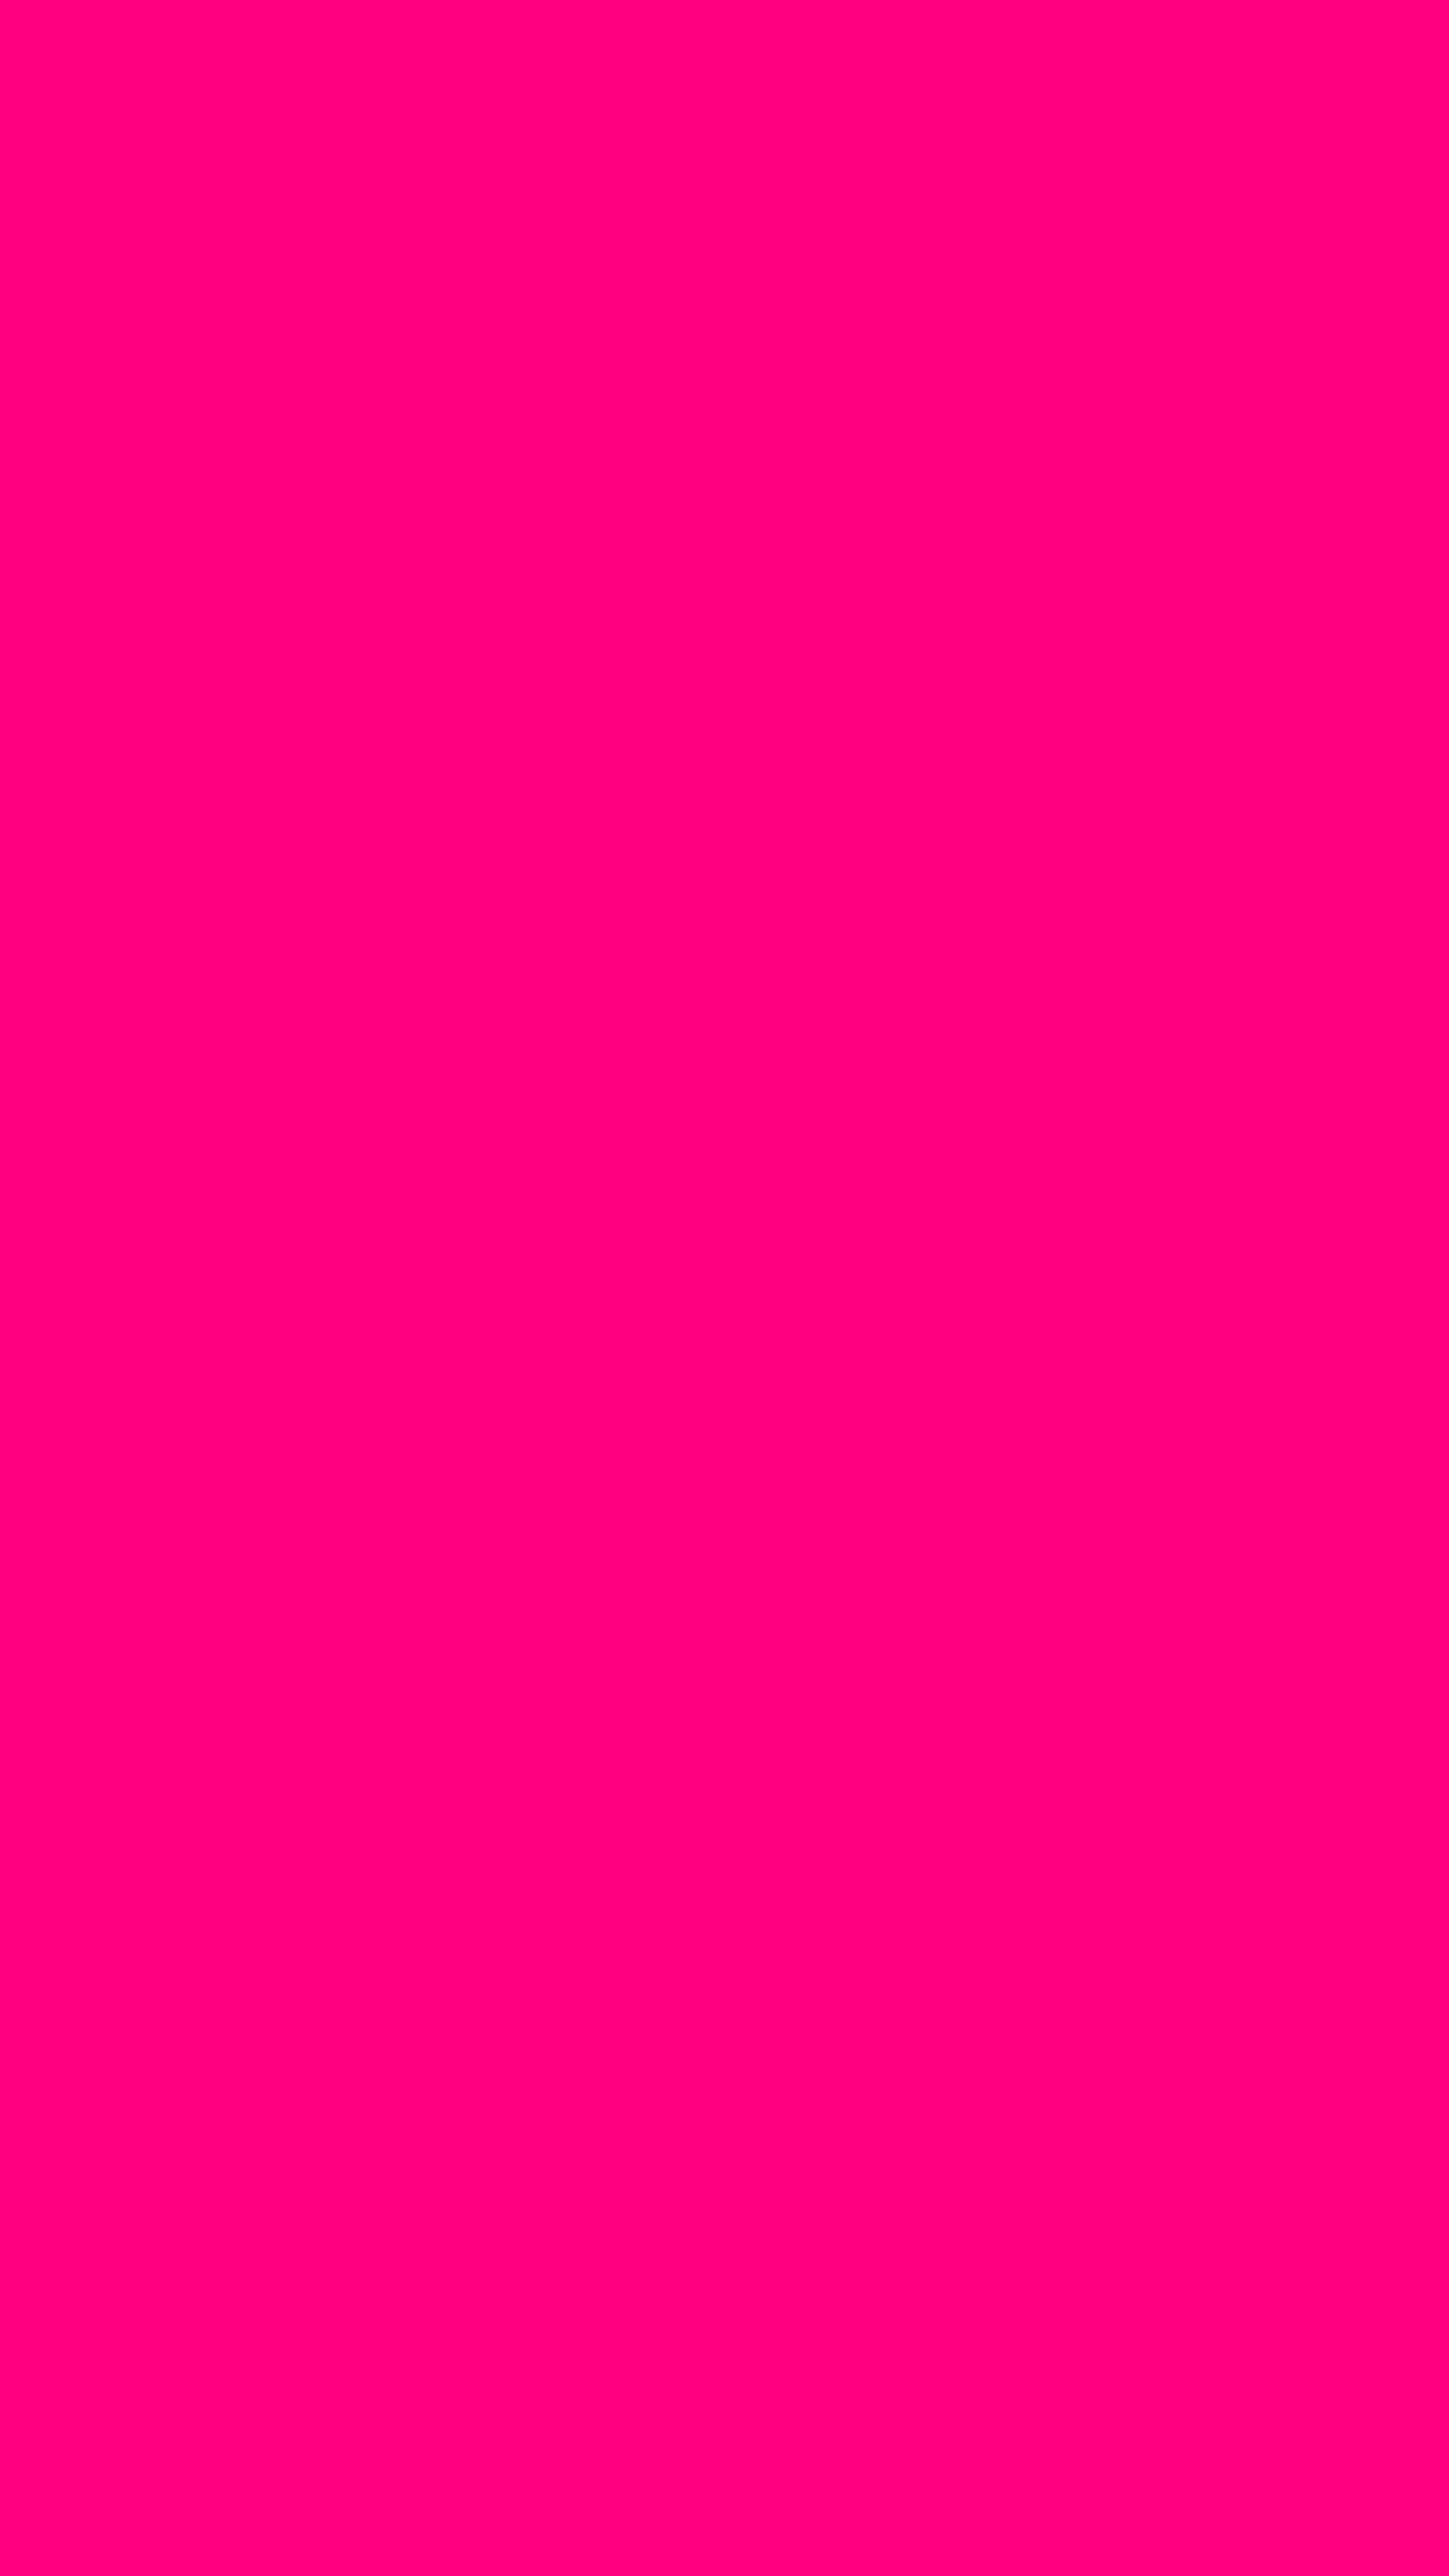 Bright pink solid color background wallpaper for mobile â phone